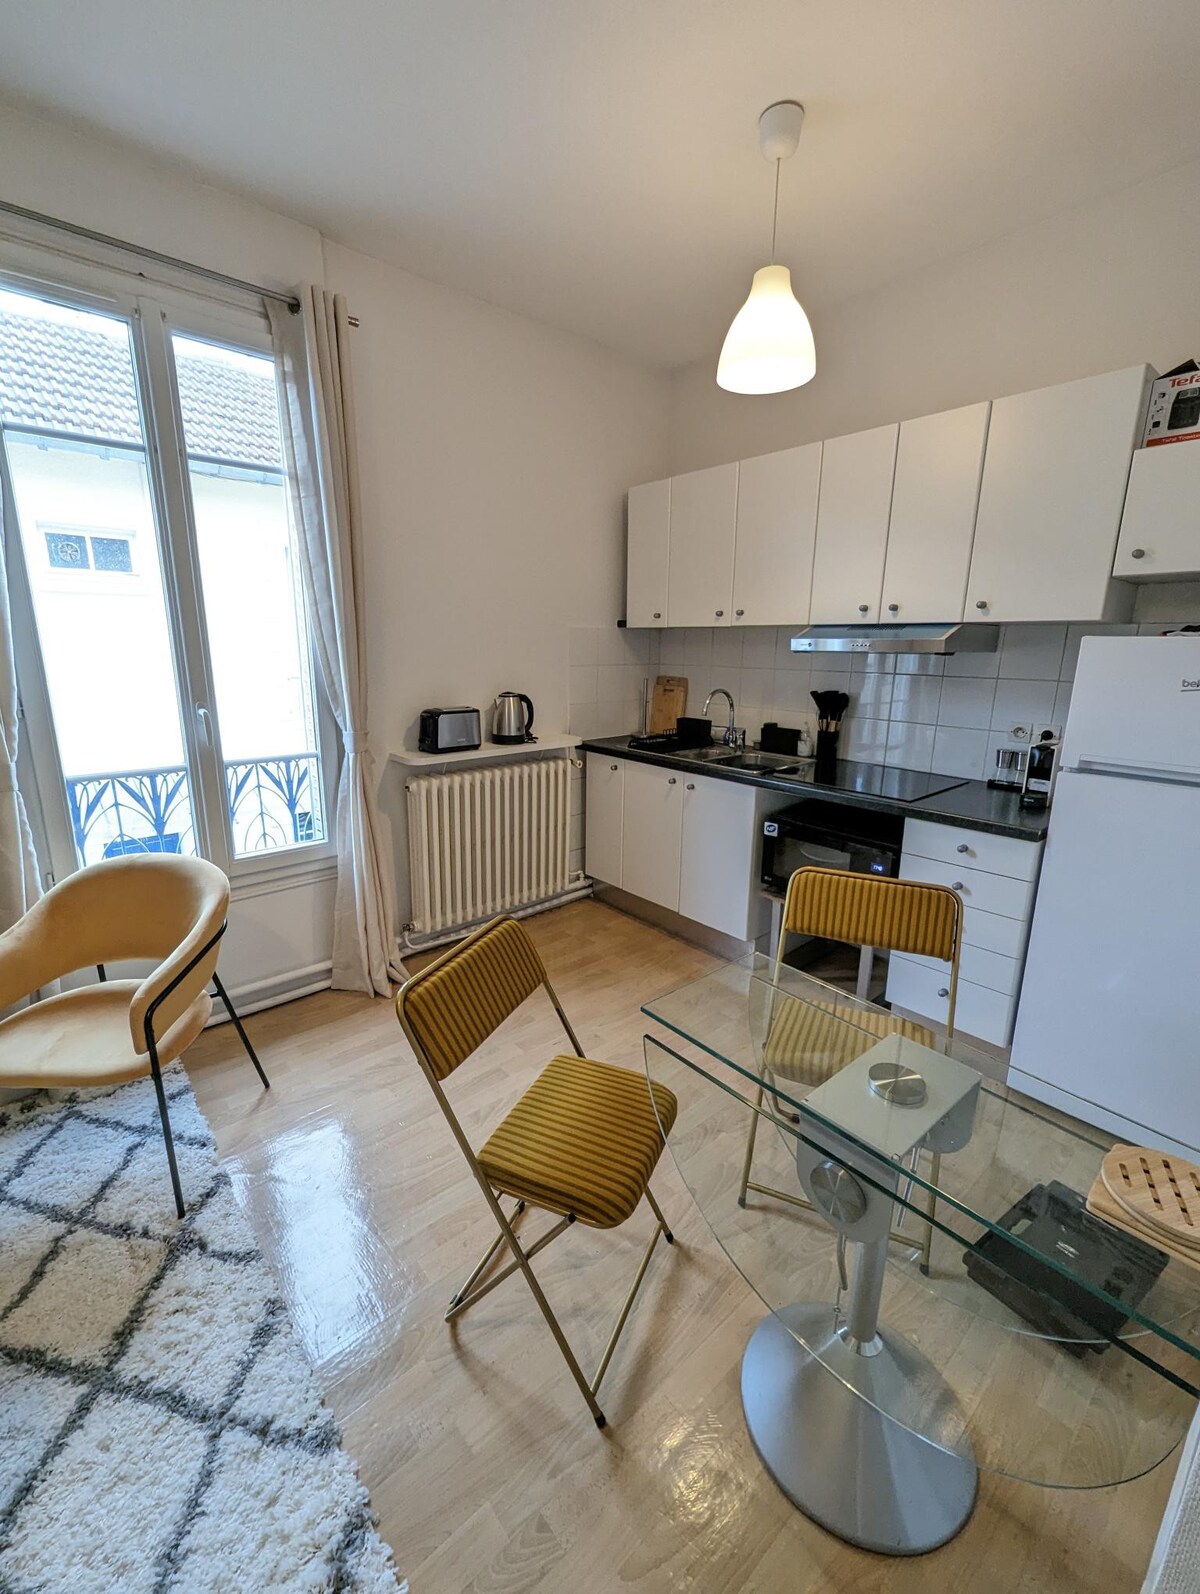 Chic high-end flat in city center 25min from Paris